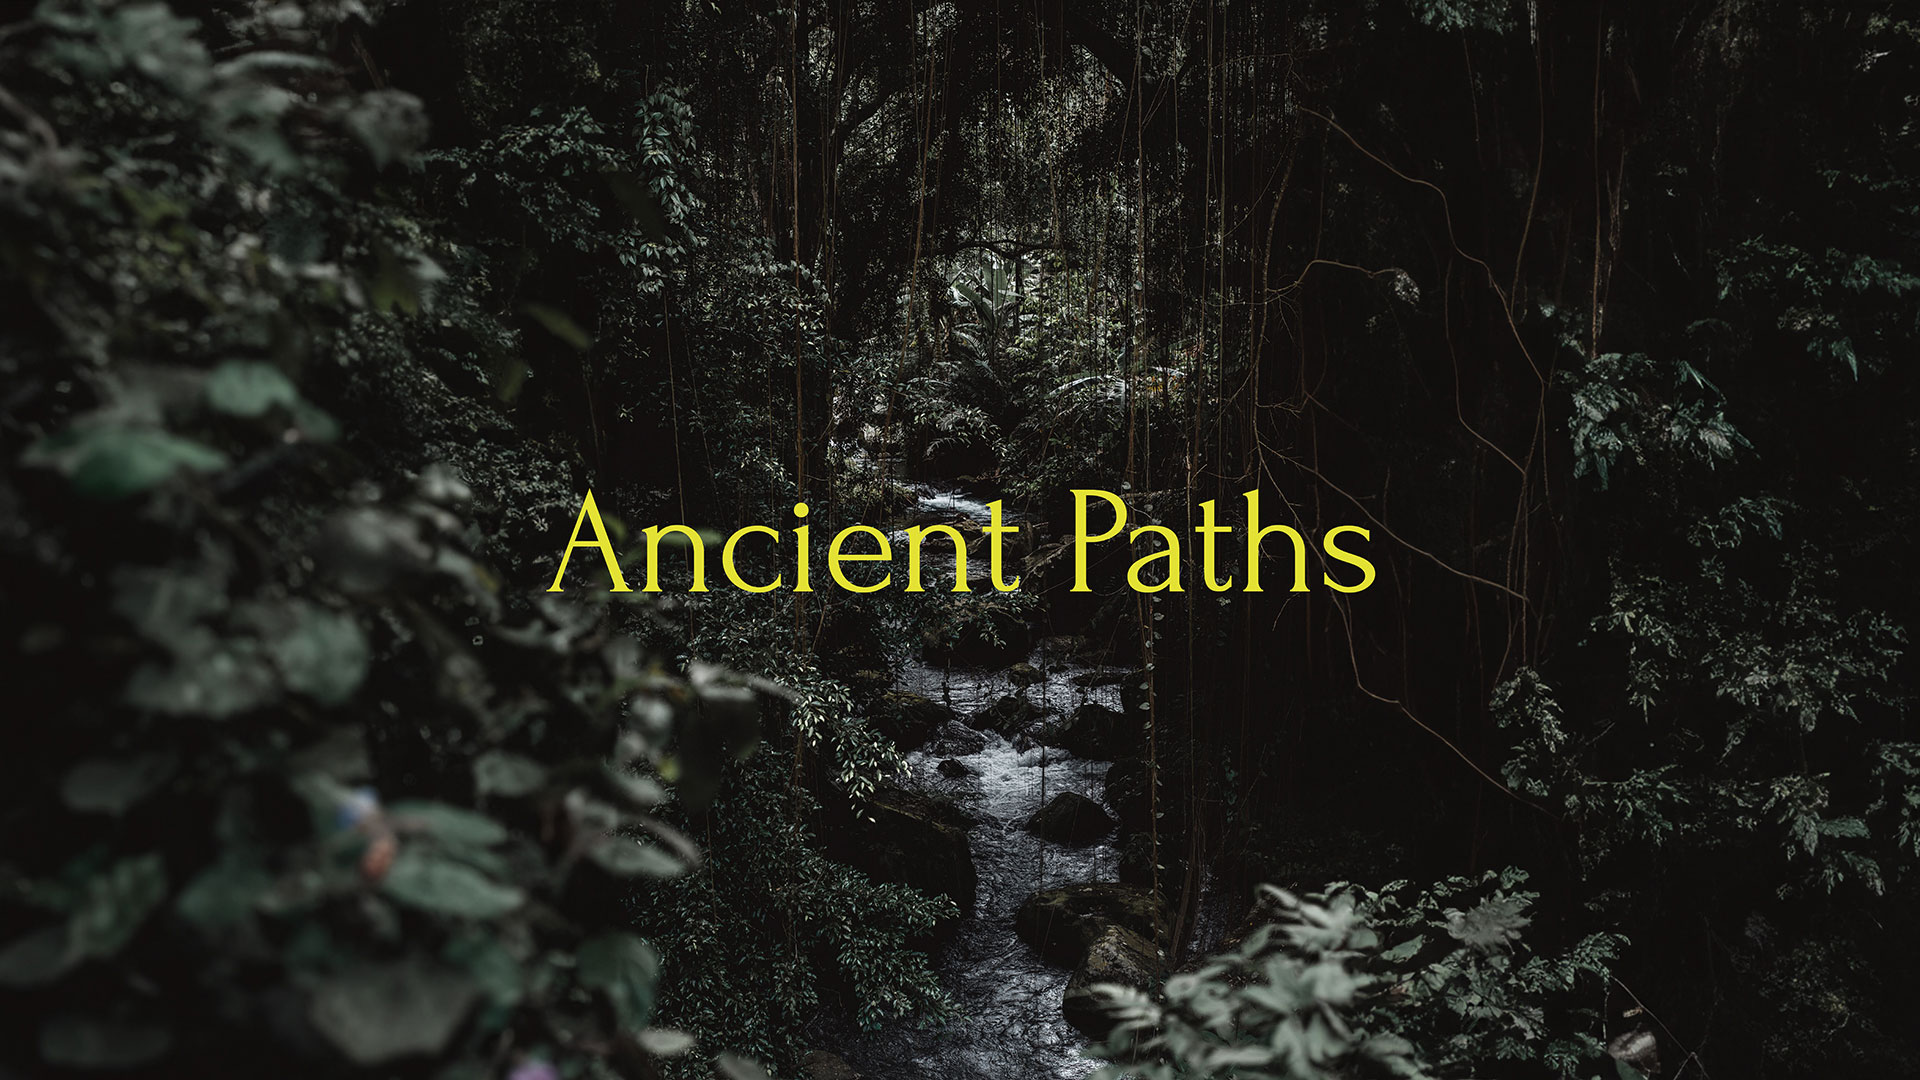 Series: Ancient Paths